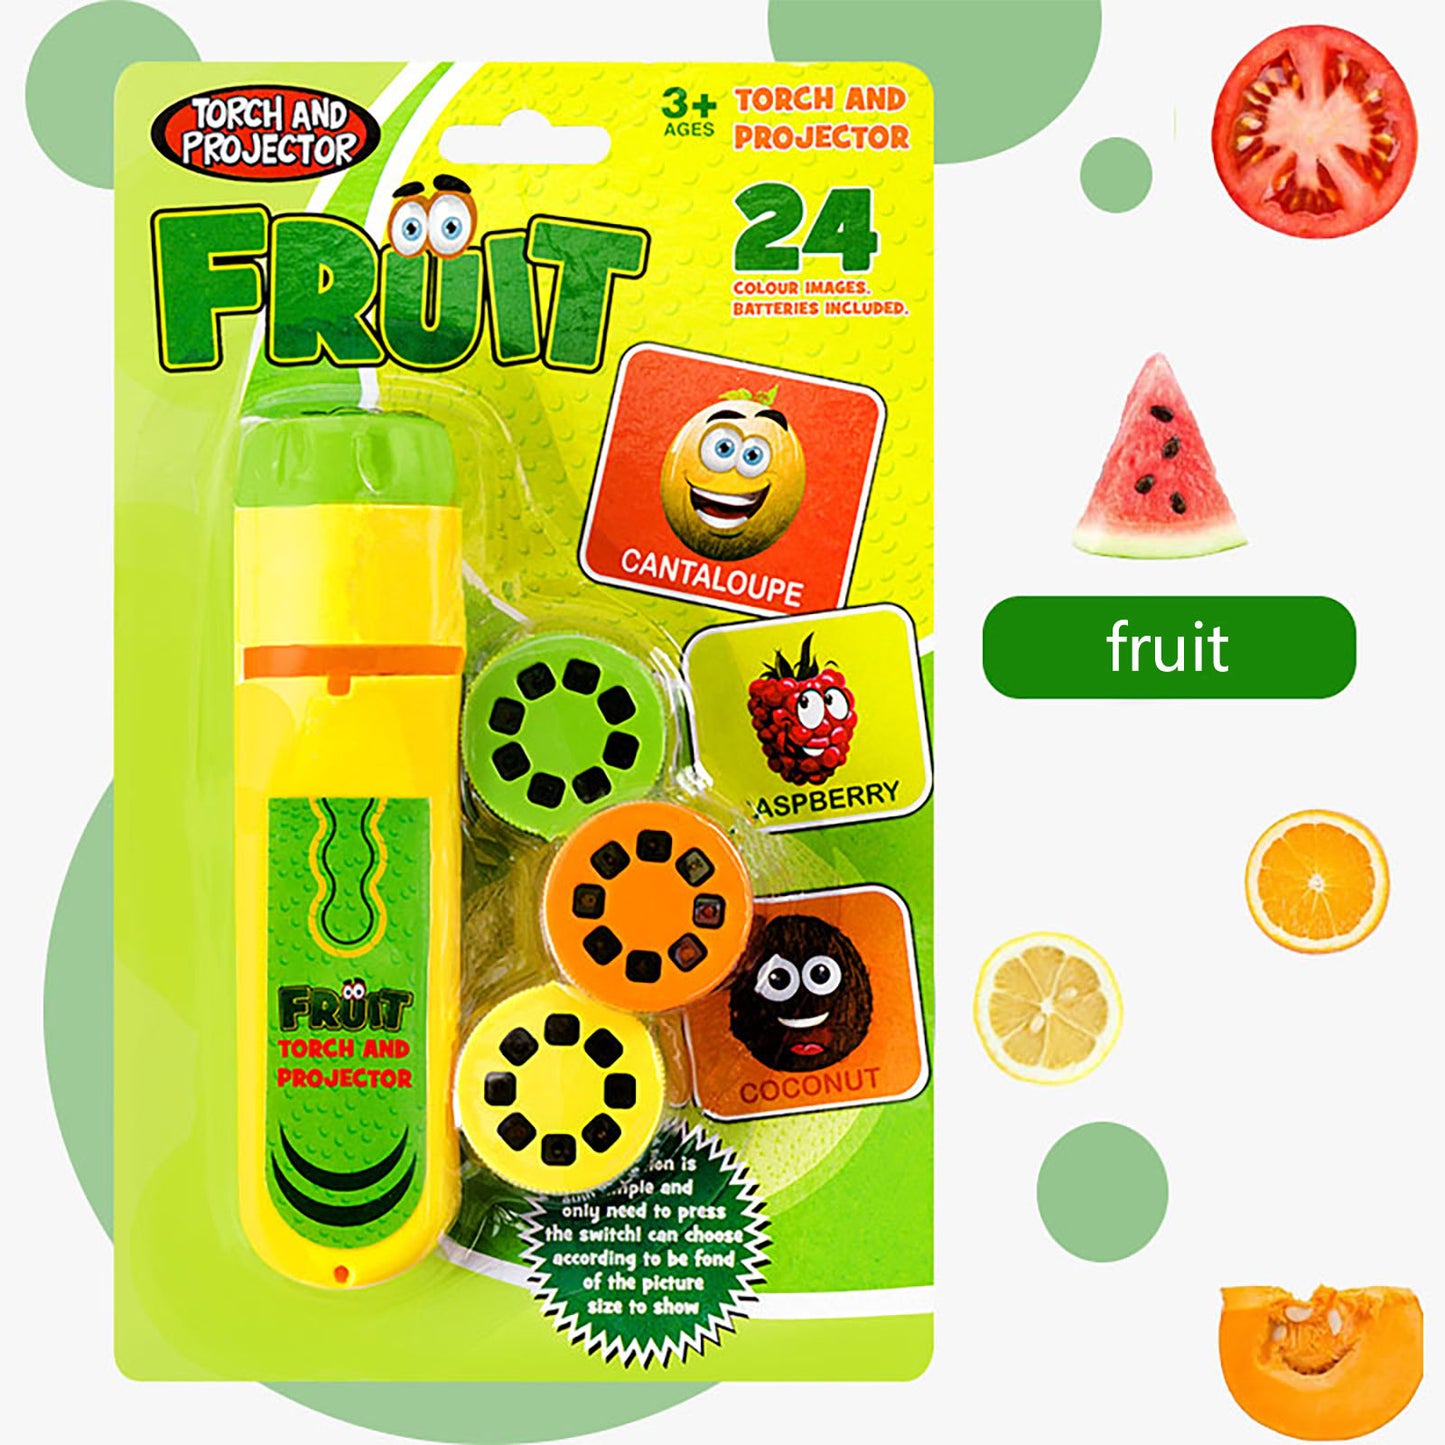 NOOLY Torch Projector Toy for Kids Flashlight Educational Toy 3 + Years Old TYWJ-01 (Vegetables and Fruits)